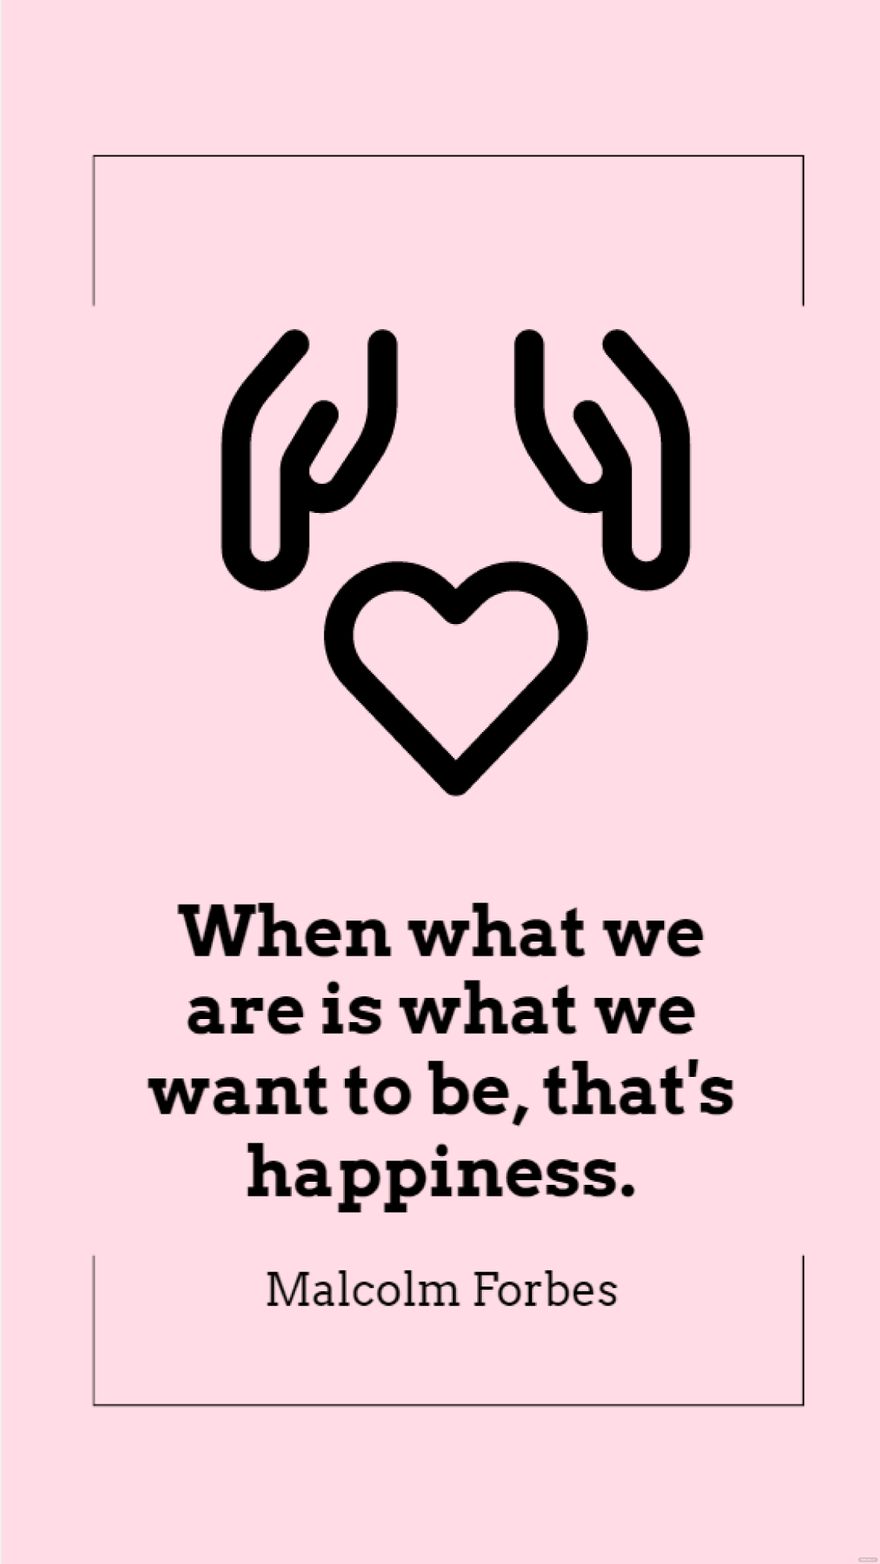 Malcolm Forbes - When what we are is what we want to be, that's happiness.